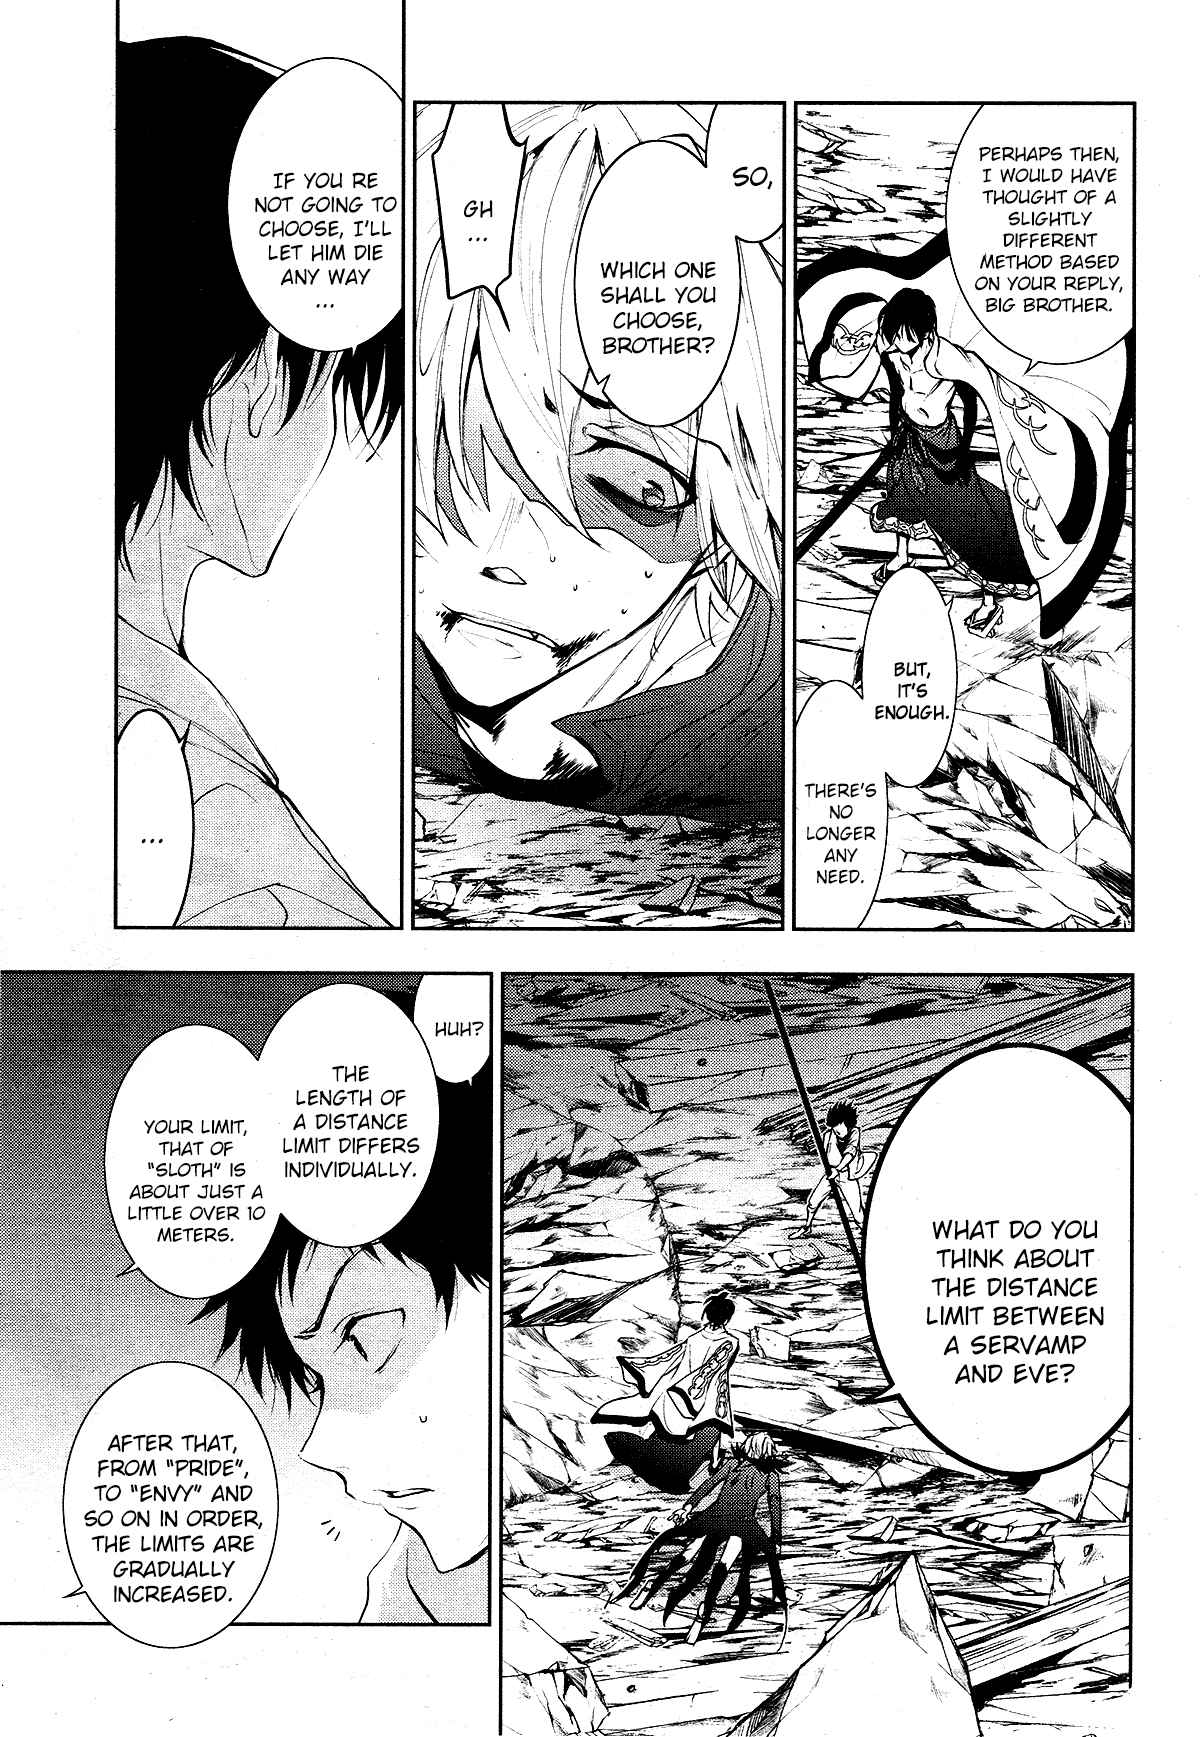 Servamp Vol. 15 Ch. 87 if You Are Going to Leave Me Behind...